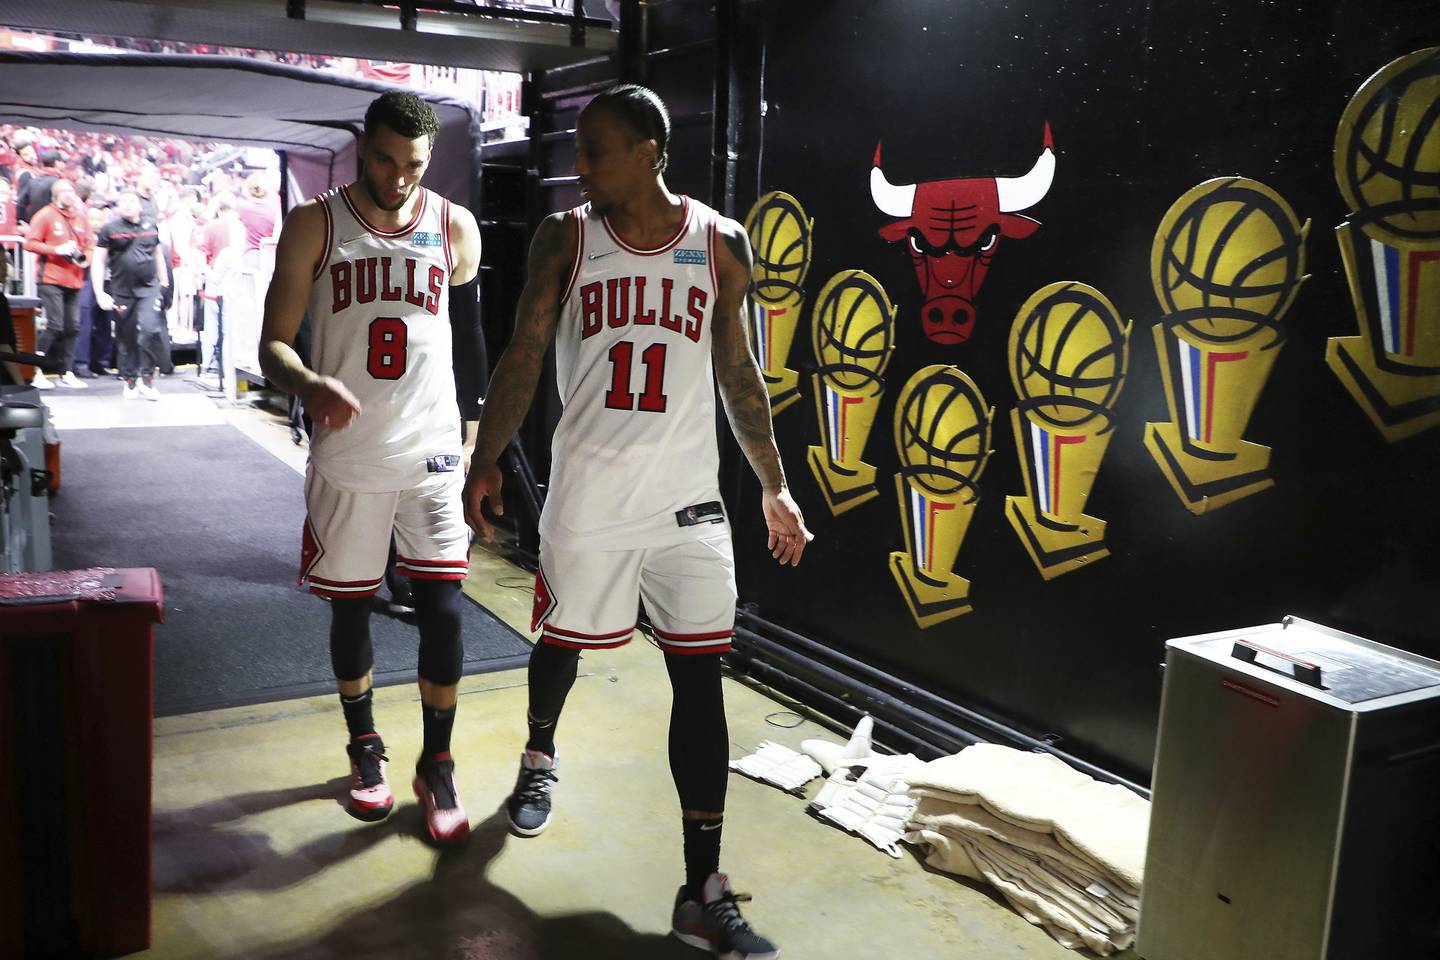 Bulls guard Zach LaVine and forward DeMar DeRozan head to their locker room after losing to the Bucks in the playoffs at the United Center on April 24, 2022.